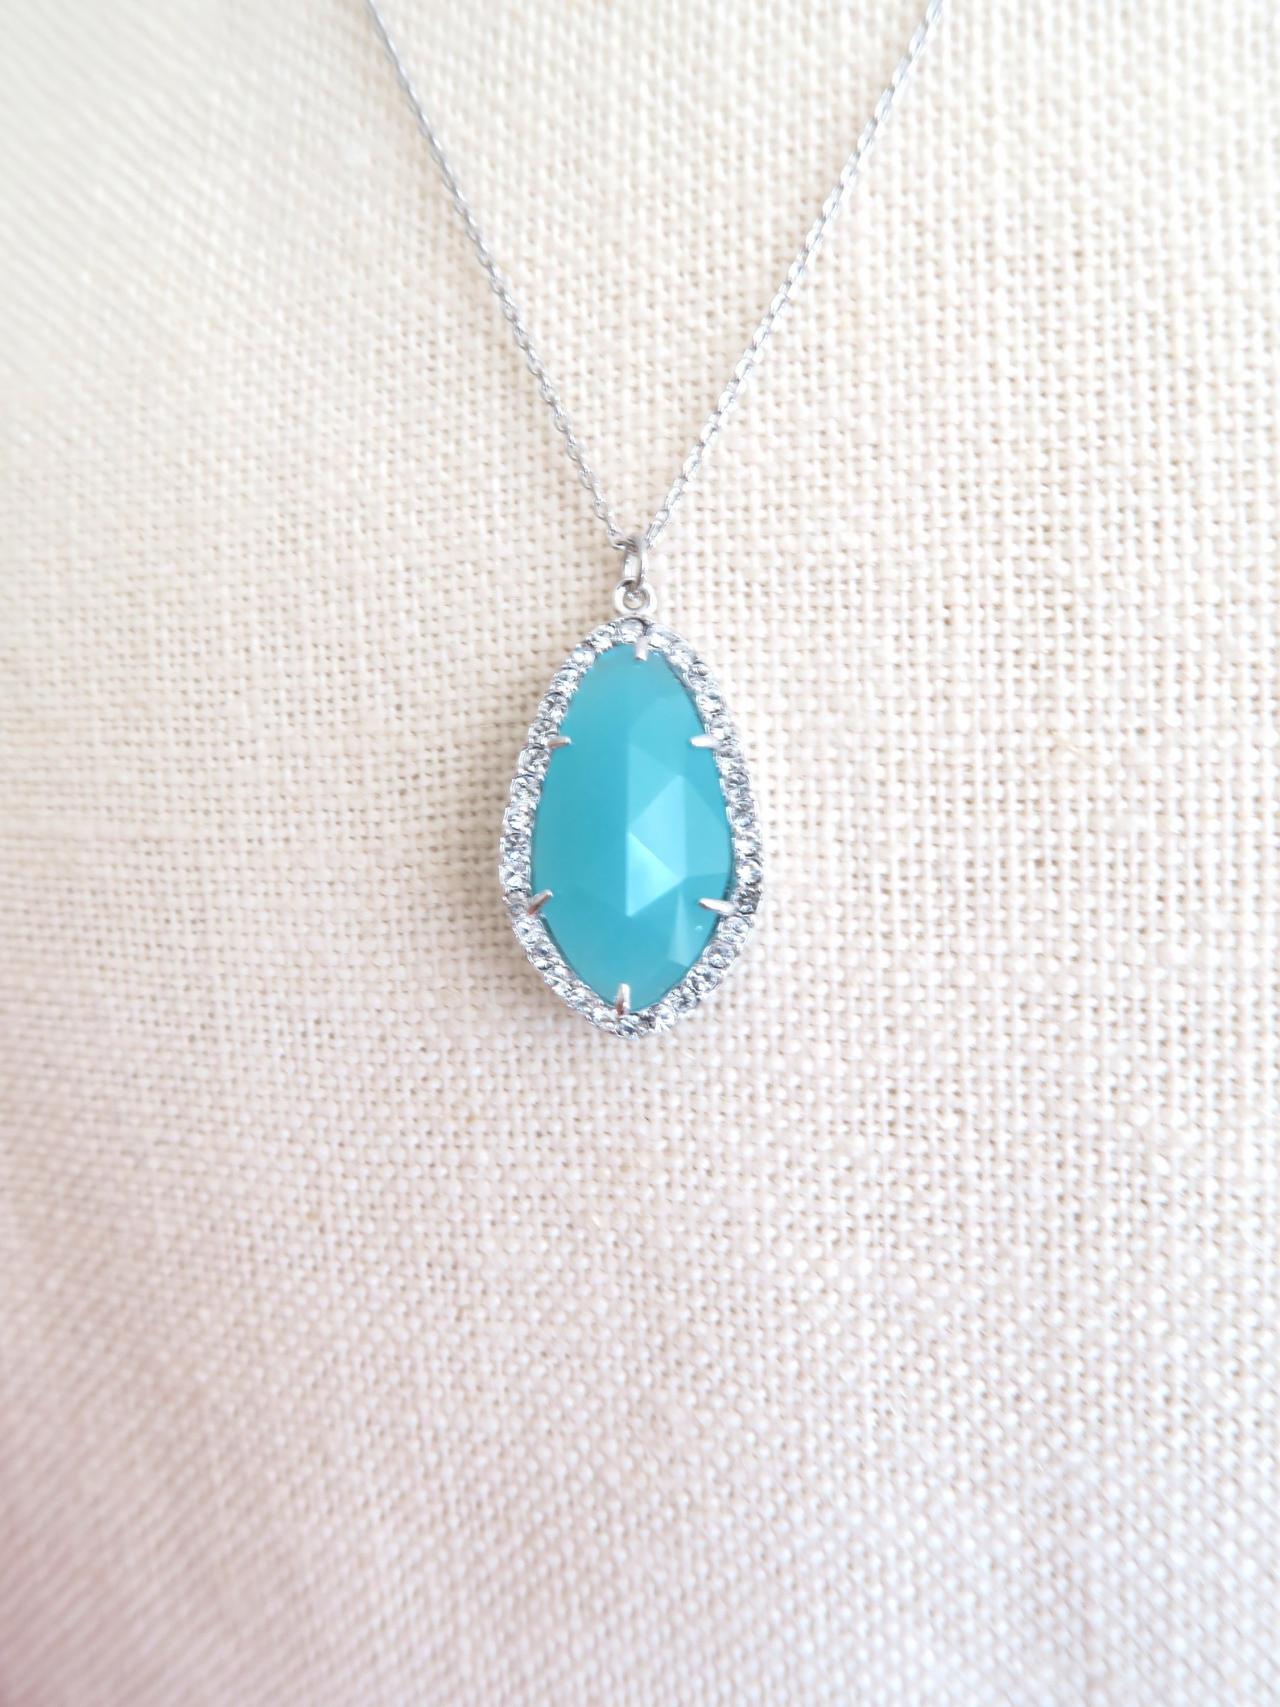 Cloudy Mint Teardrop Necklace Light Blue Crystal Charm Necklace Sky Blue Wedding Necklace Bridesmaids Gift Birthday Gift (n013)